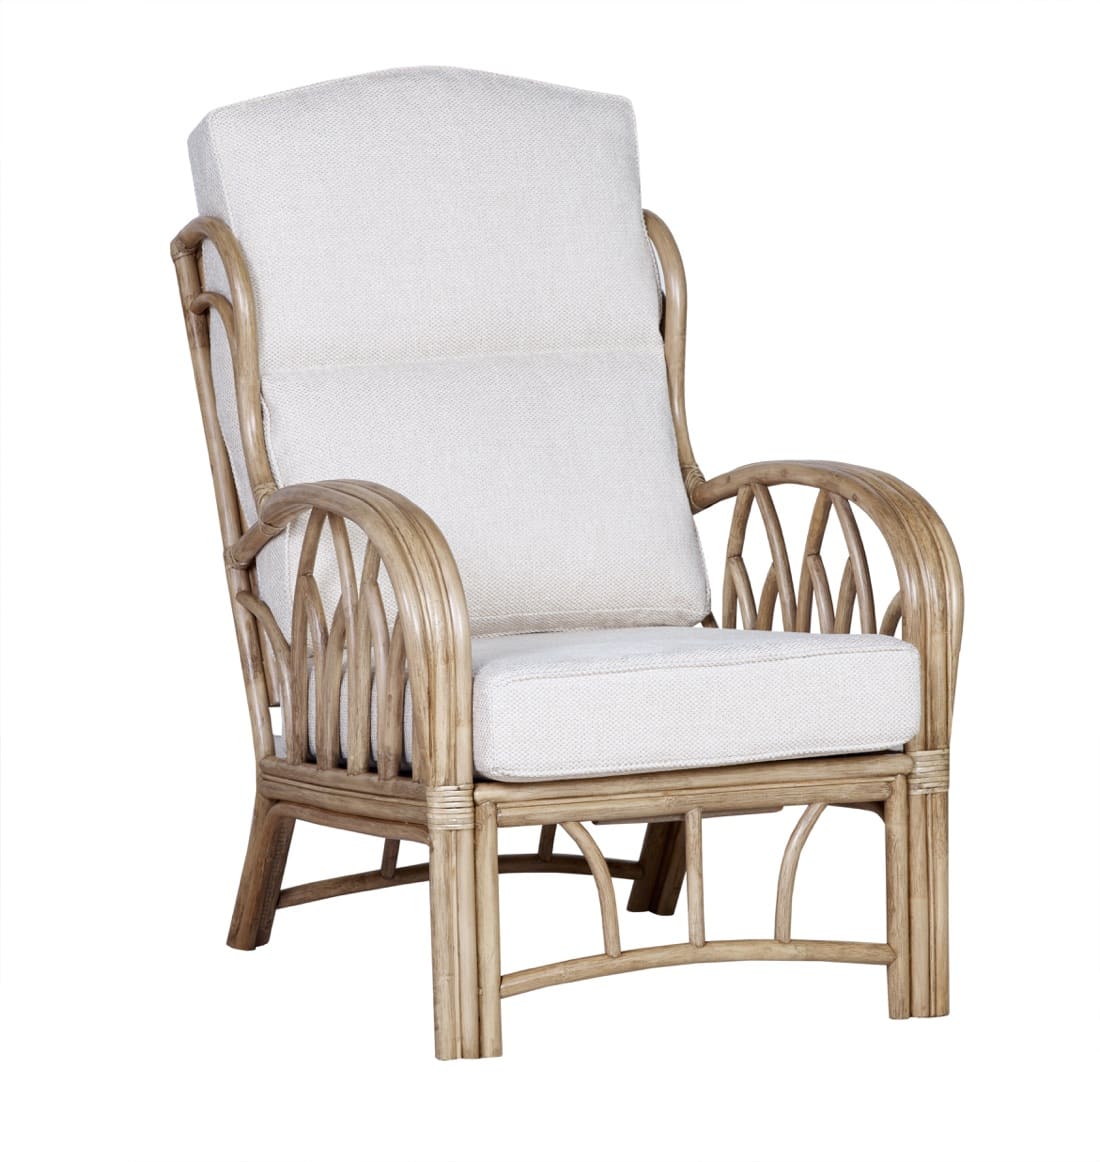 Showing image for Lana armchair